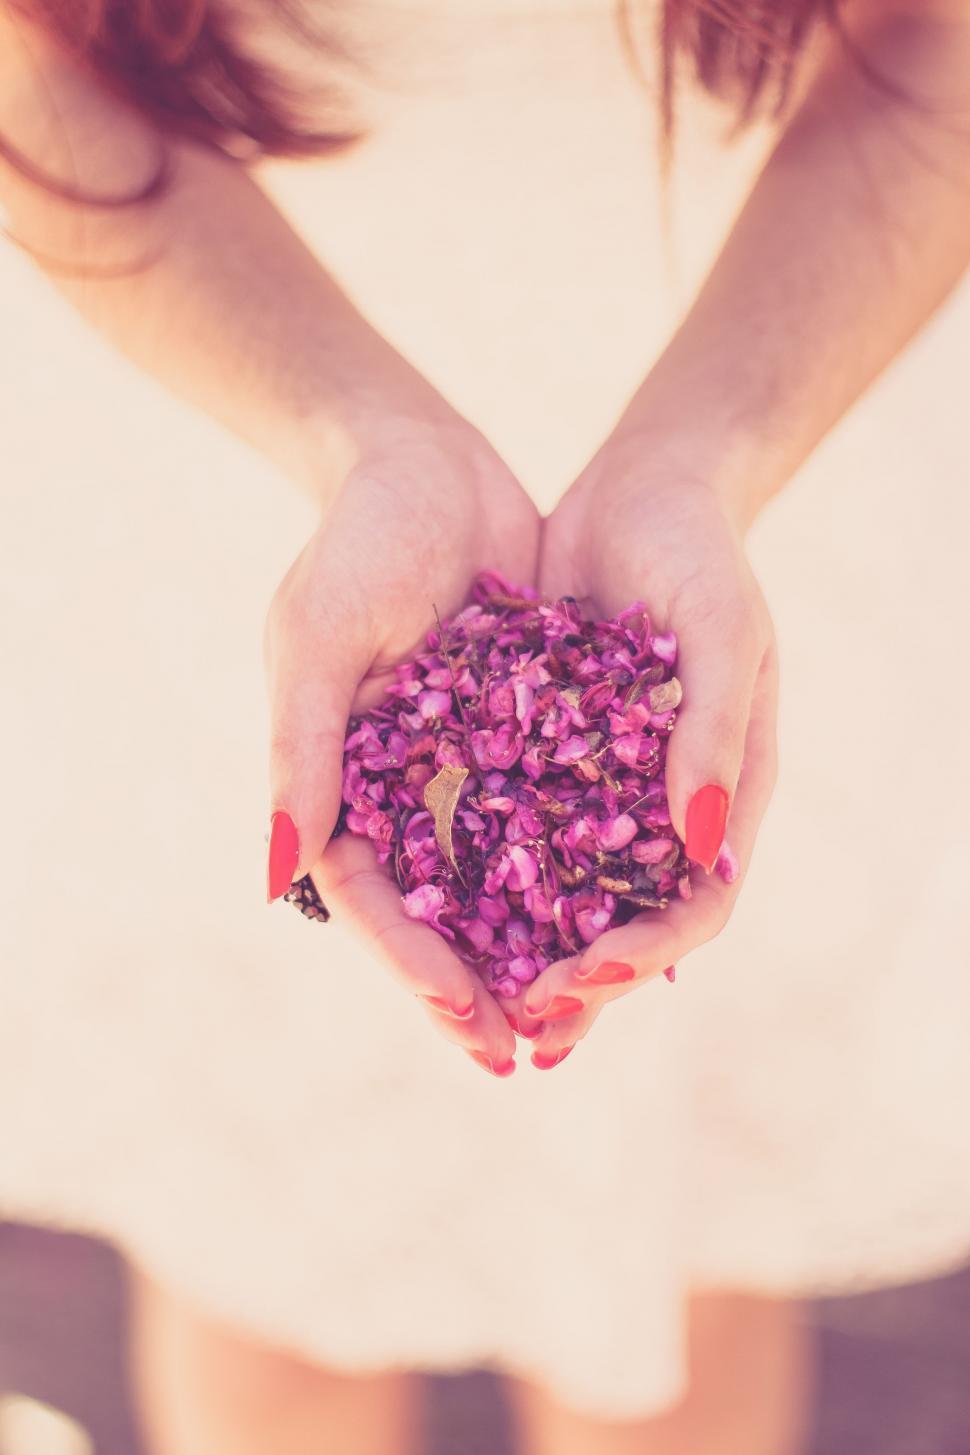 Free Image of Flower petals in hand  